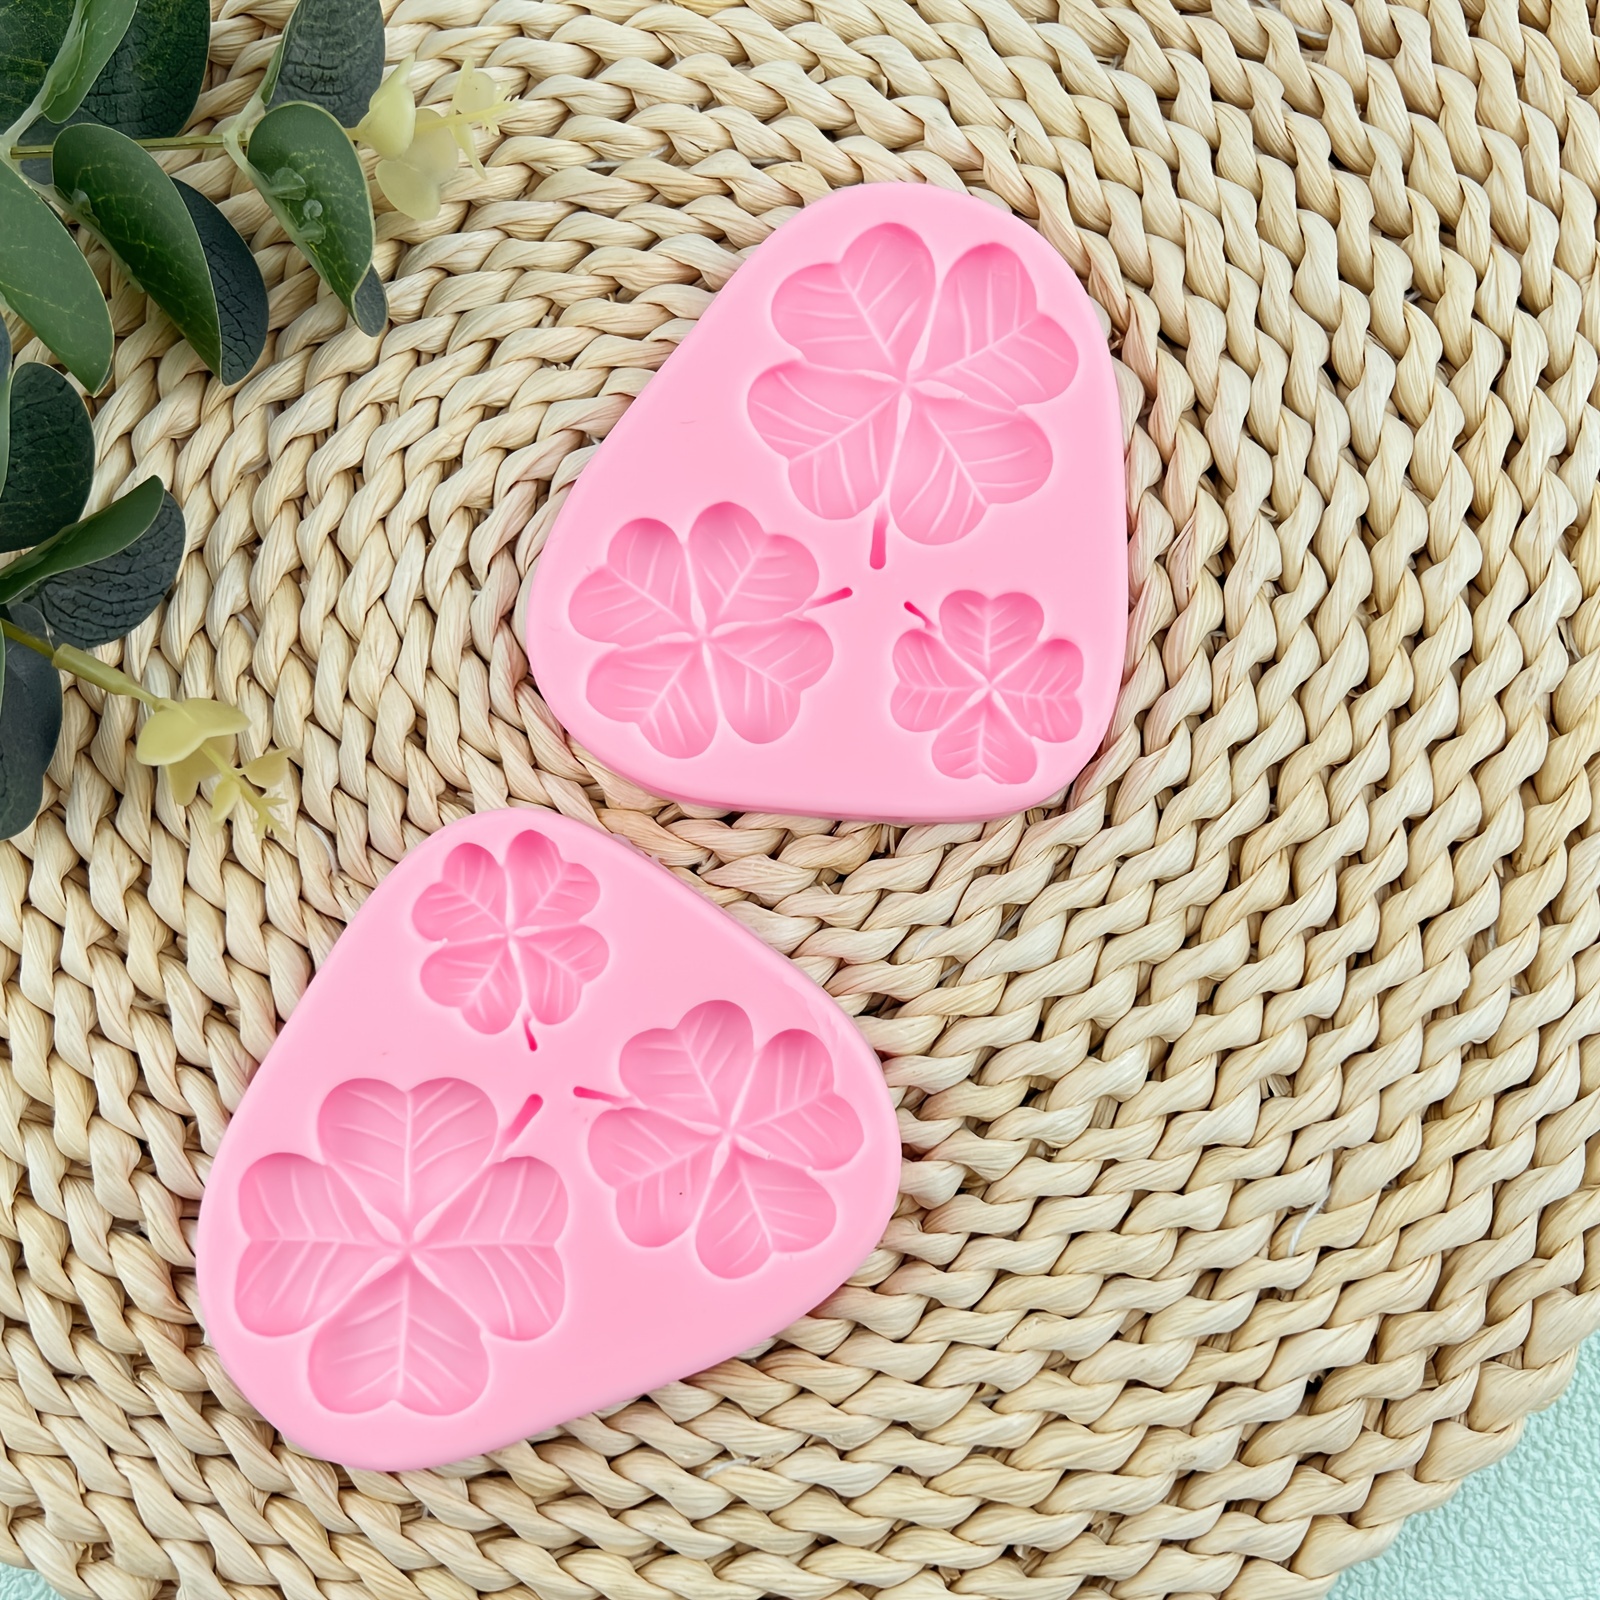 OPONIC 3D Strawberry Flowers Silicone Mold,Cake Fondant Molds for Chocolate Cookie Pastry Pies,Cake Cup Cake Candy Decoration,Polymer Clay Wedding Birthday